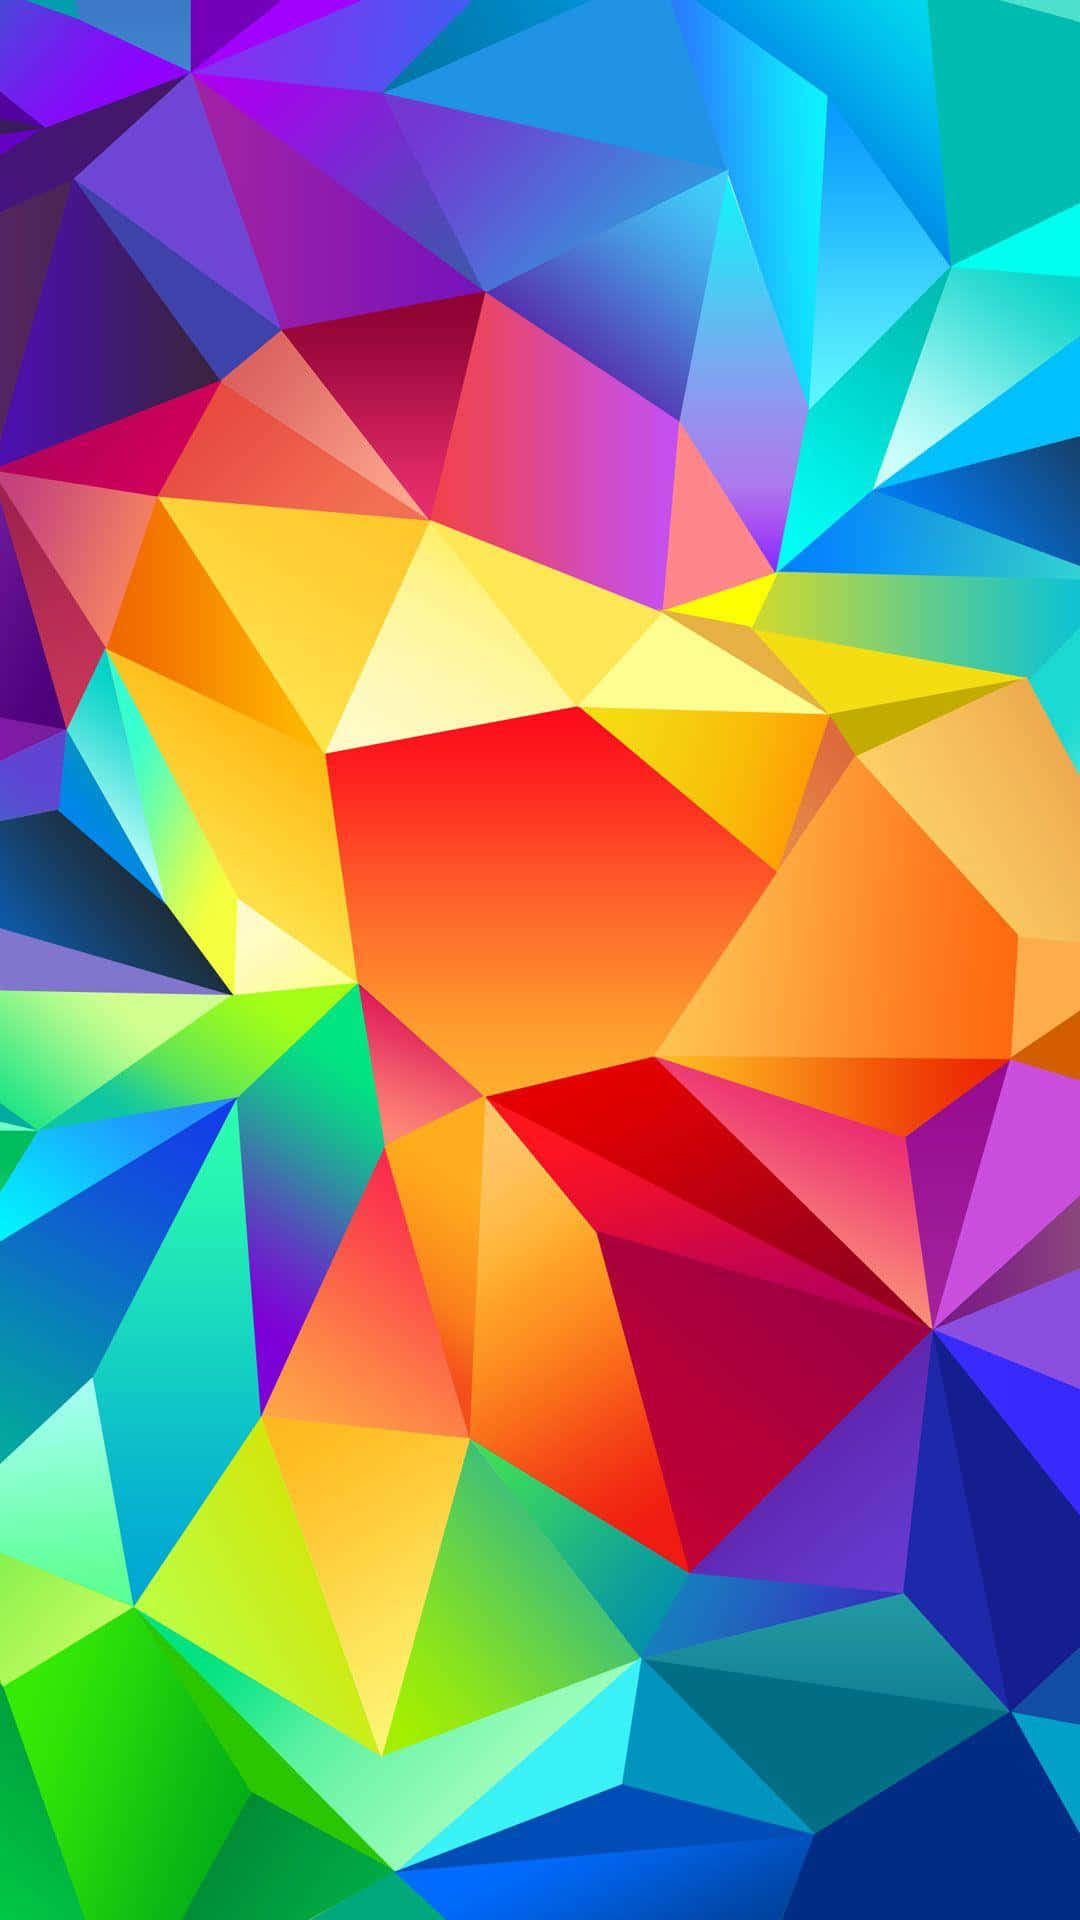 Free Colorful Iphone Wallpaper Downloads, [100+] Colorful Iphone Wallpapers  for FREE 